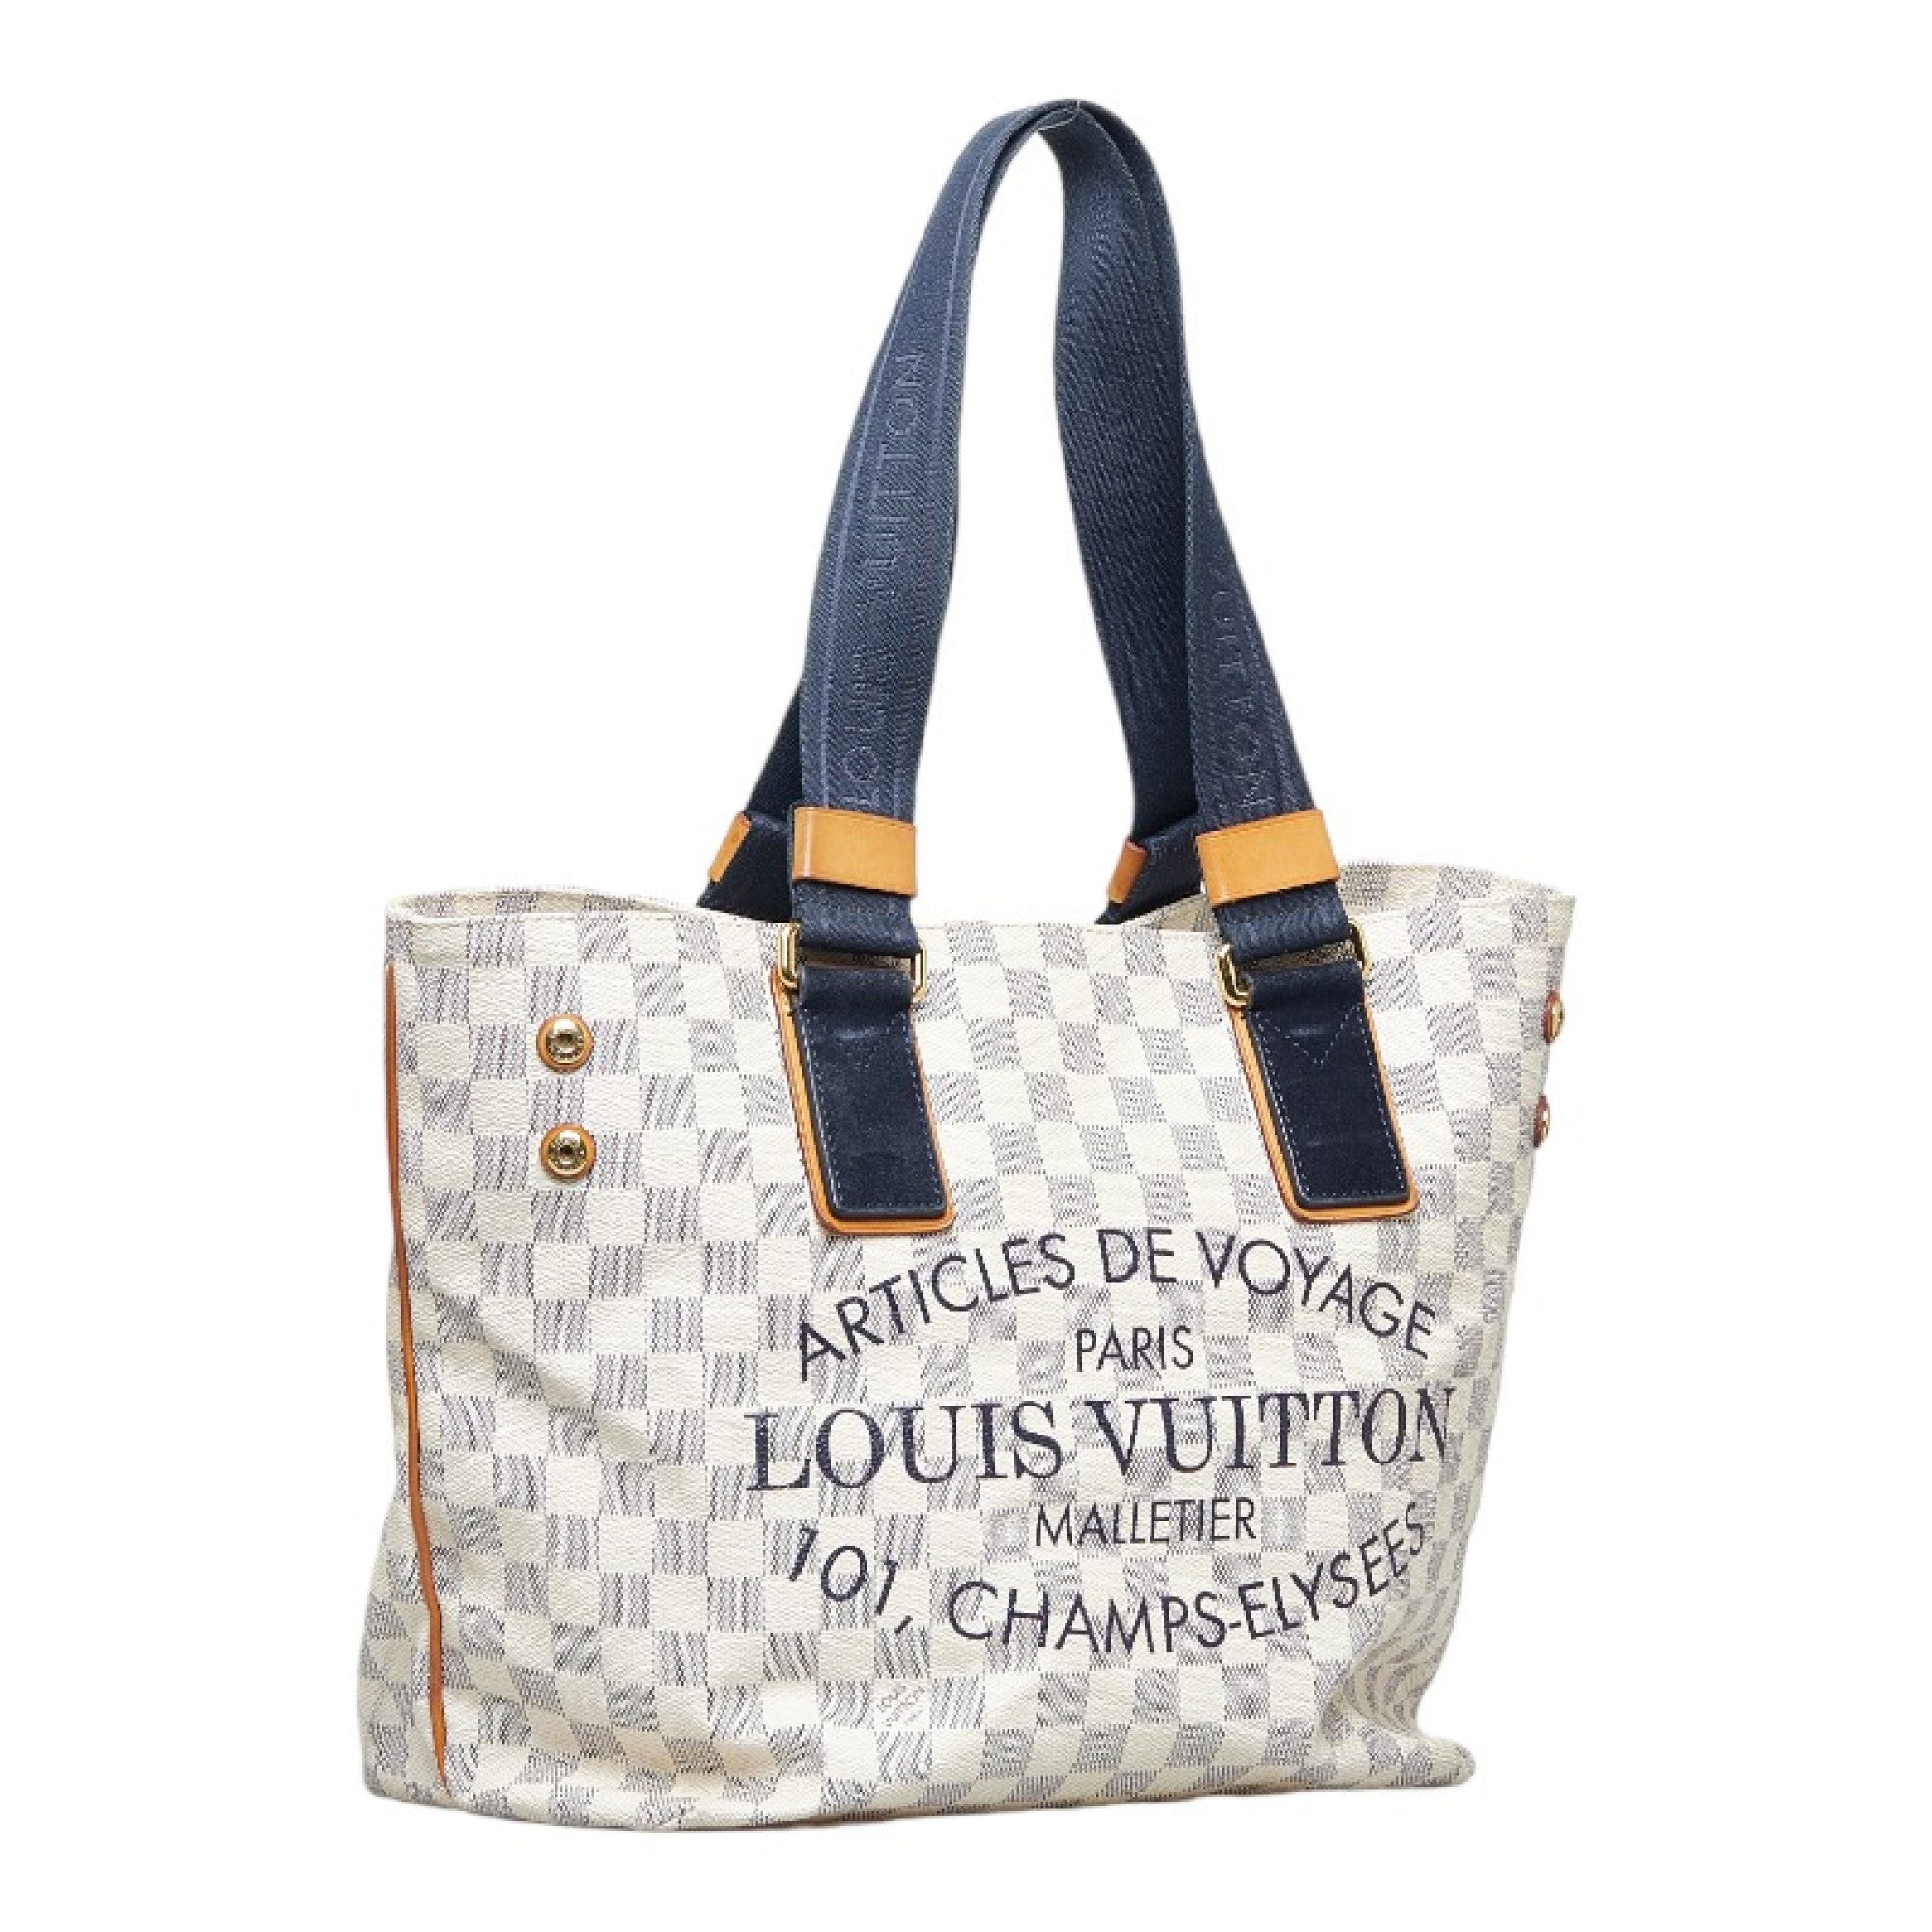 Articles de Voyage Cabas PM, Used & Preloved Louis Vuitton Tote Bag, LXR  USA, White